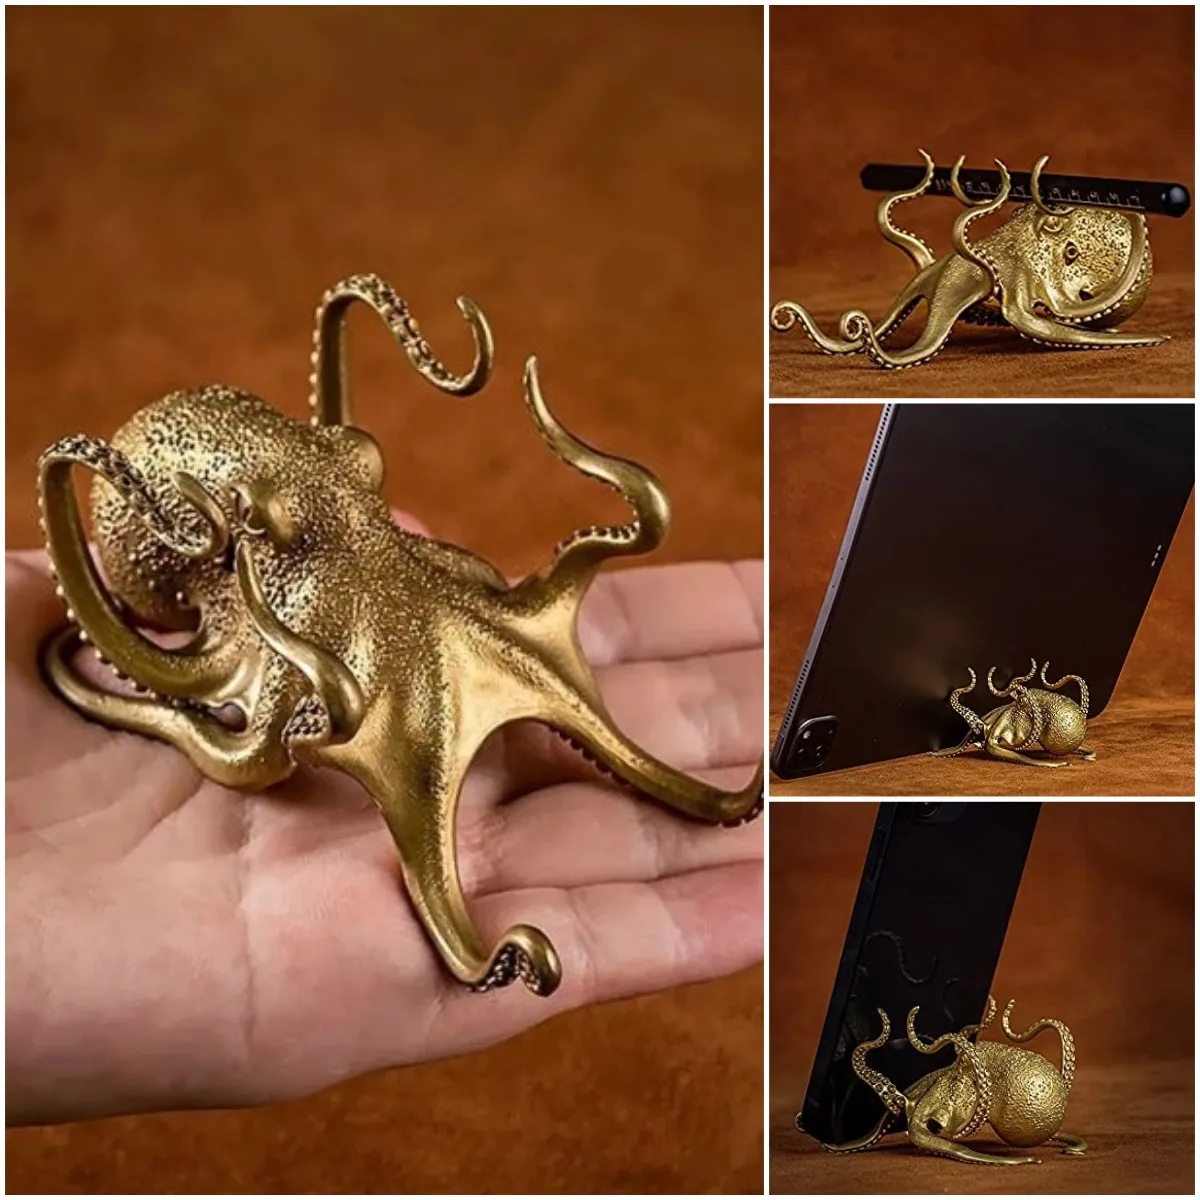 🔥Hot Sale-50% OFF🤣Funny Octopus Phone Holder🐙